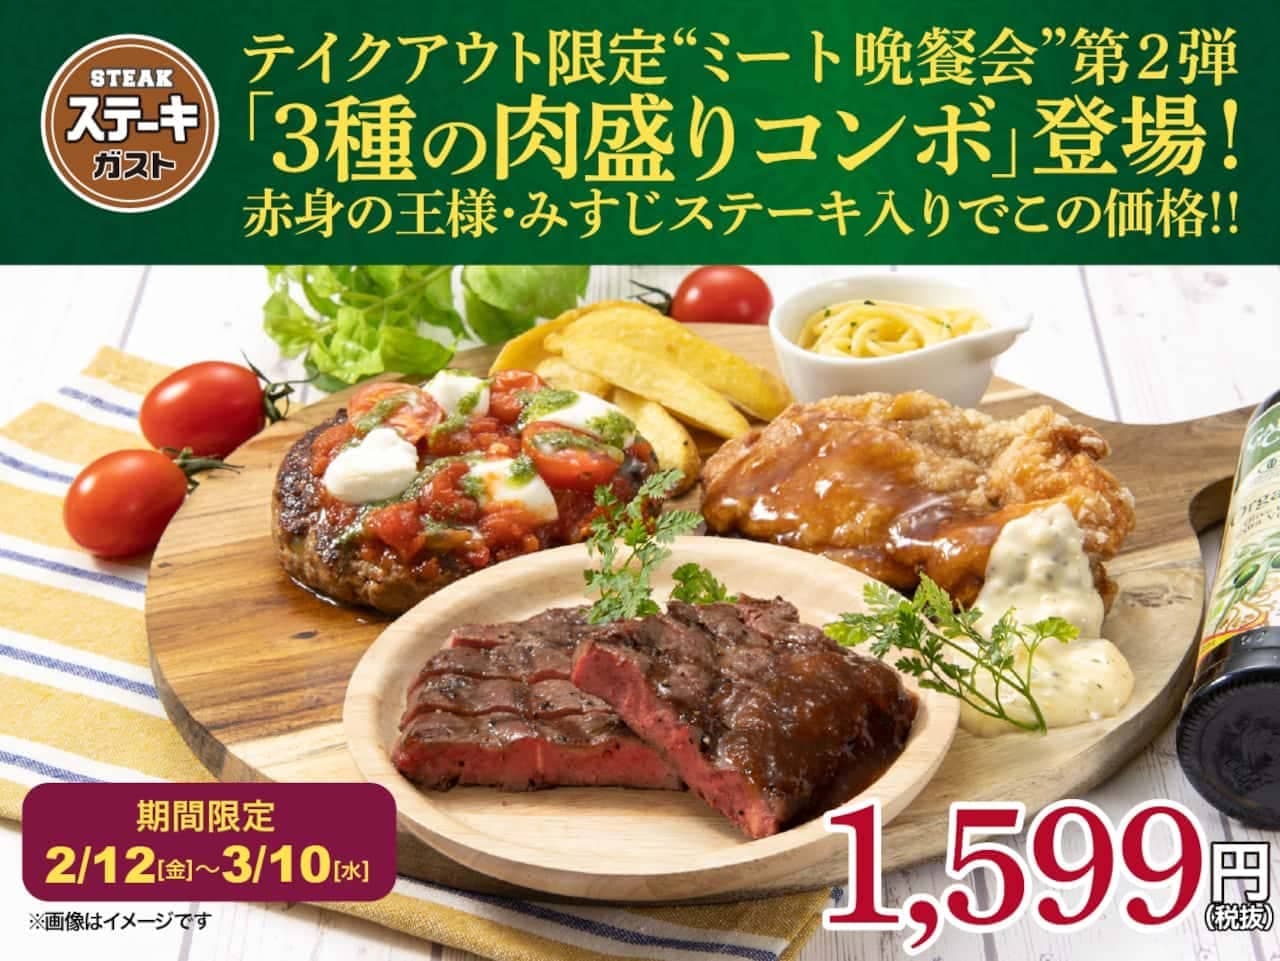 Gust Steak Gust "To go" Campaign